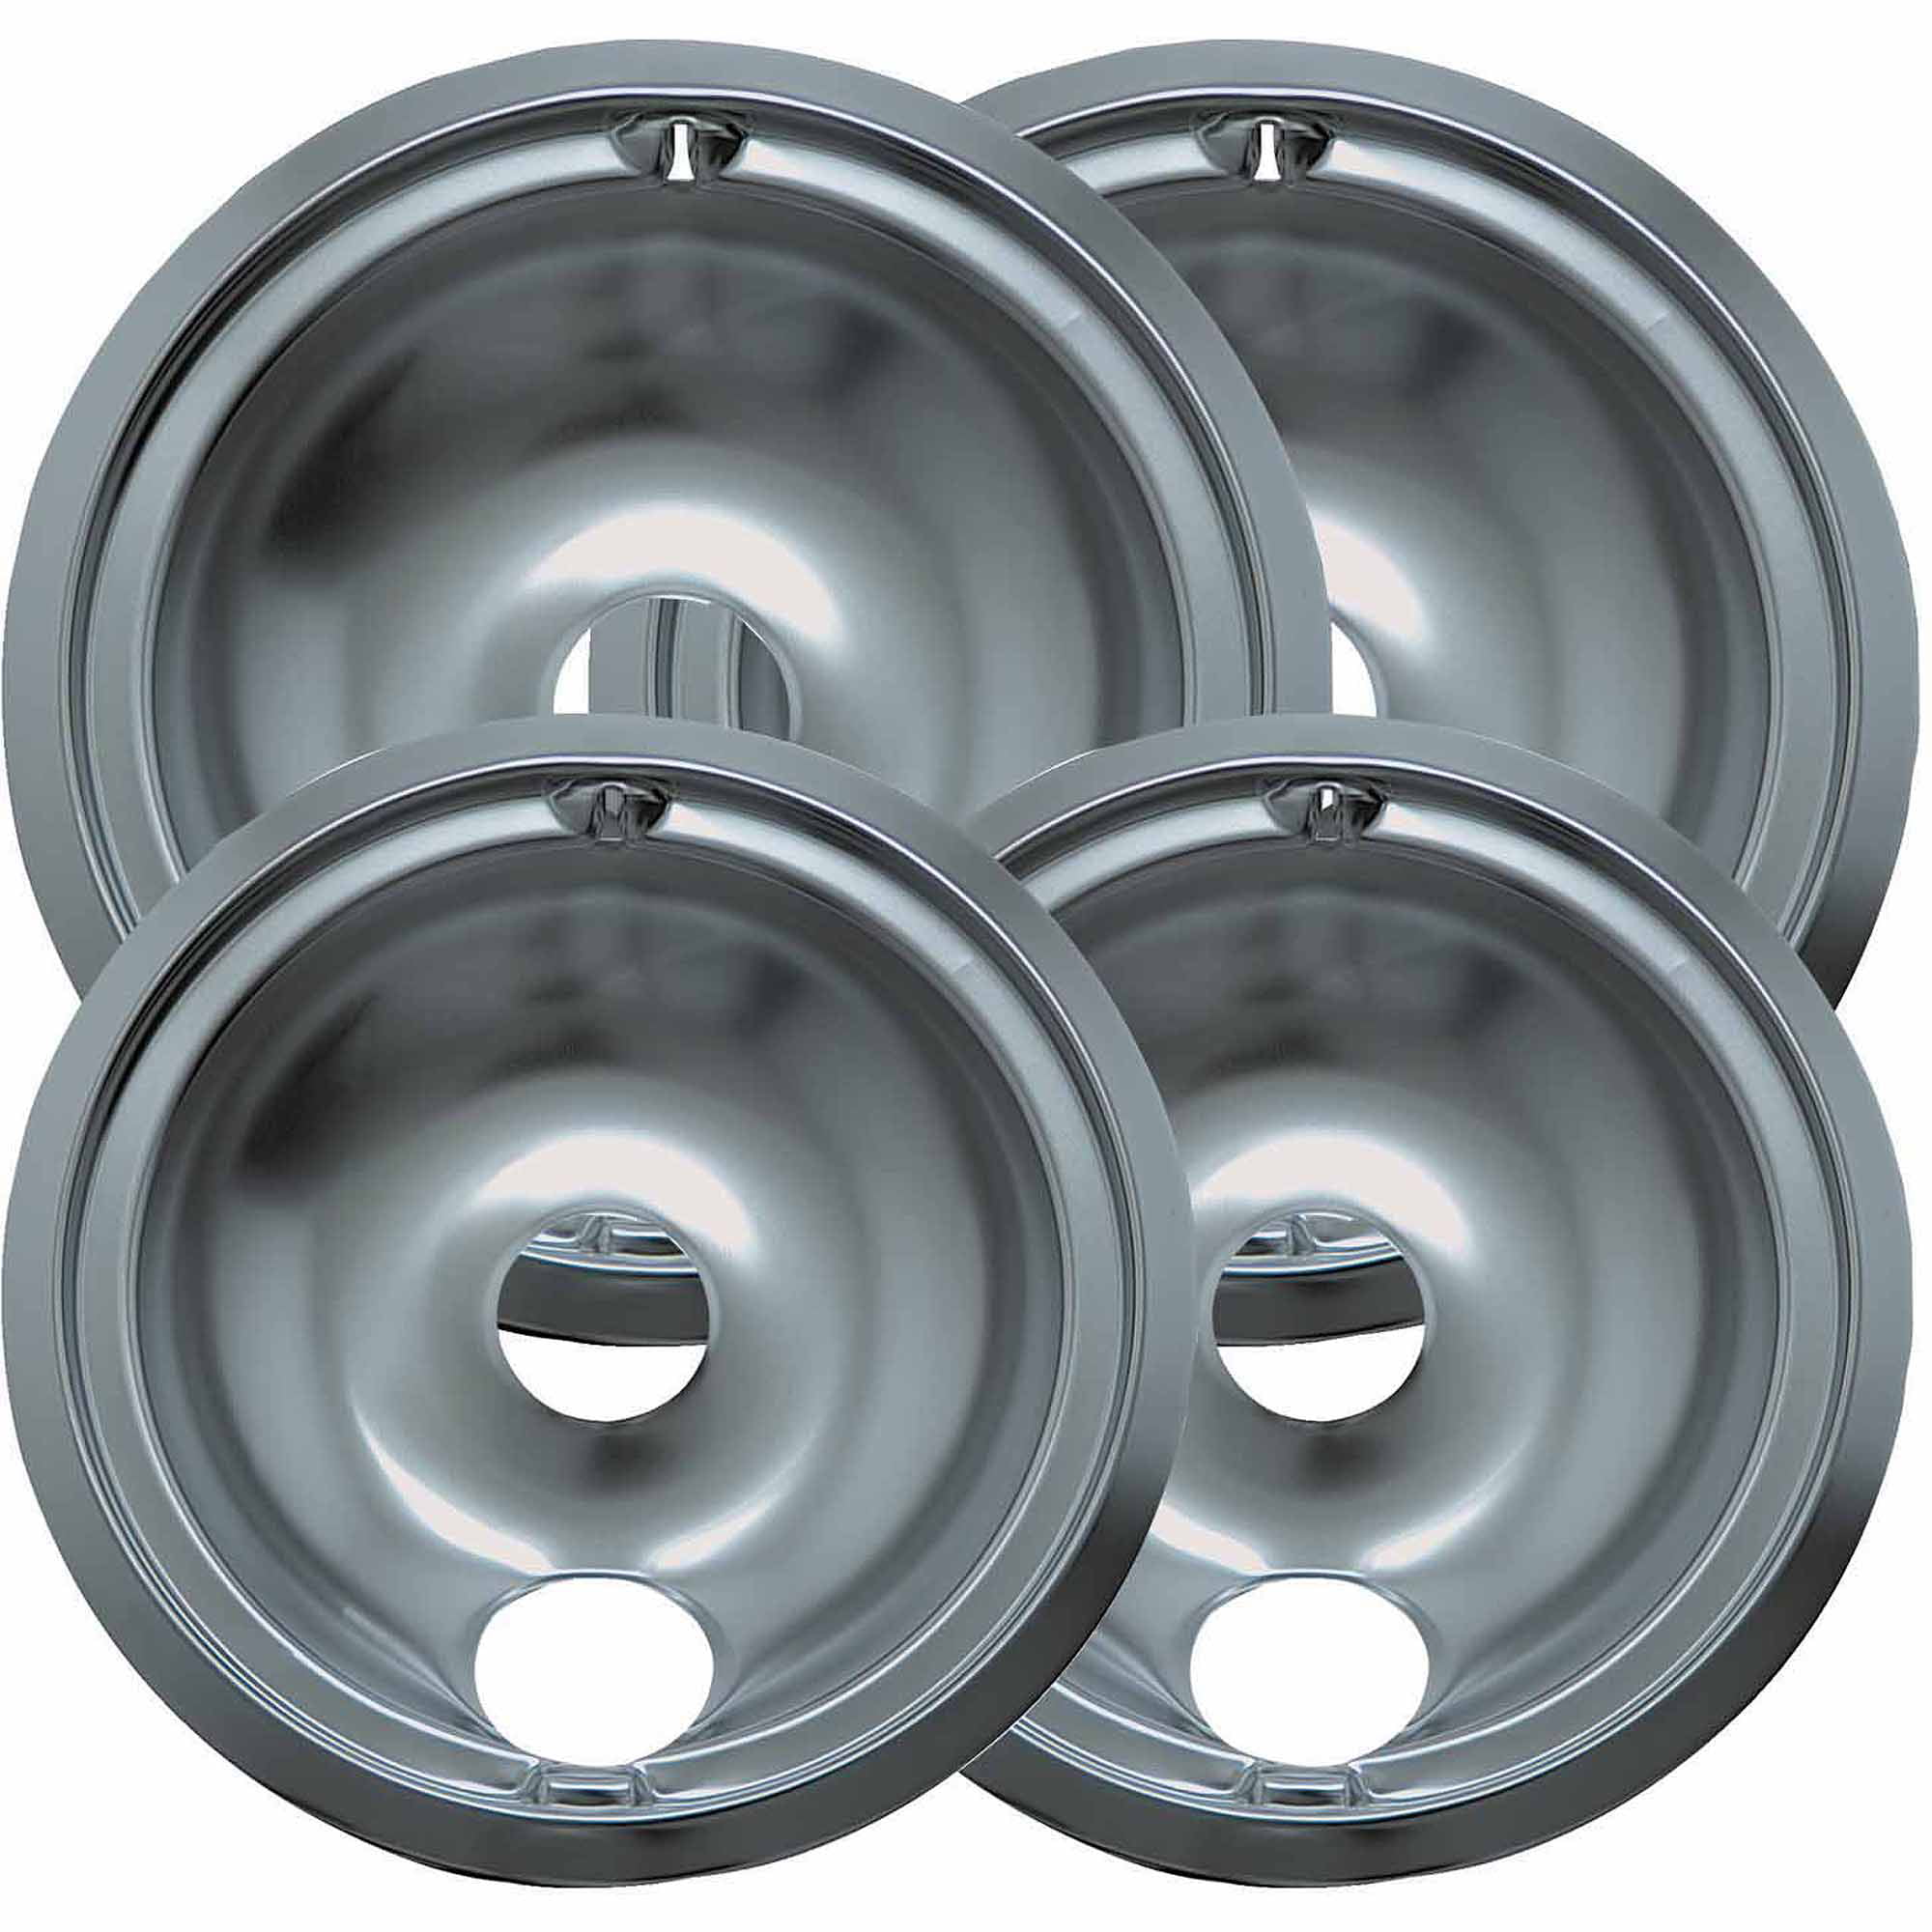 4 GE Hotpoint Chrome Stove Drip Pans Electric Burner Covers Top Replacement Set 